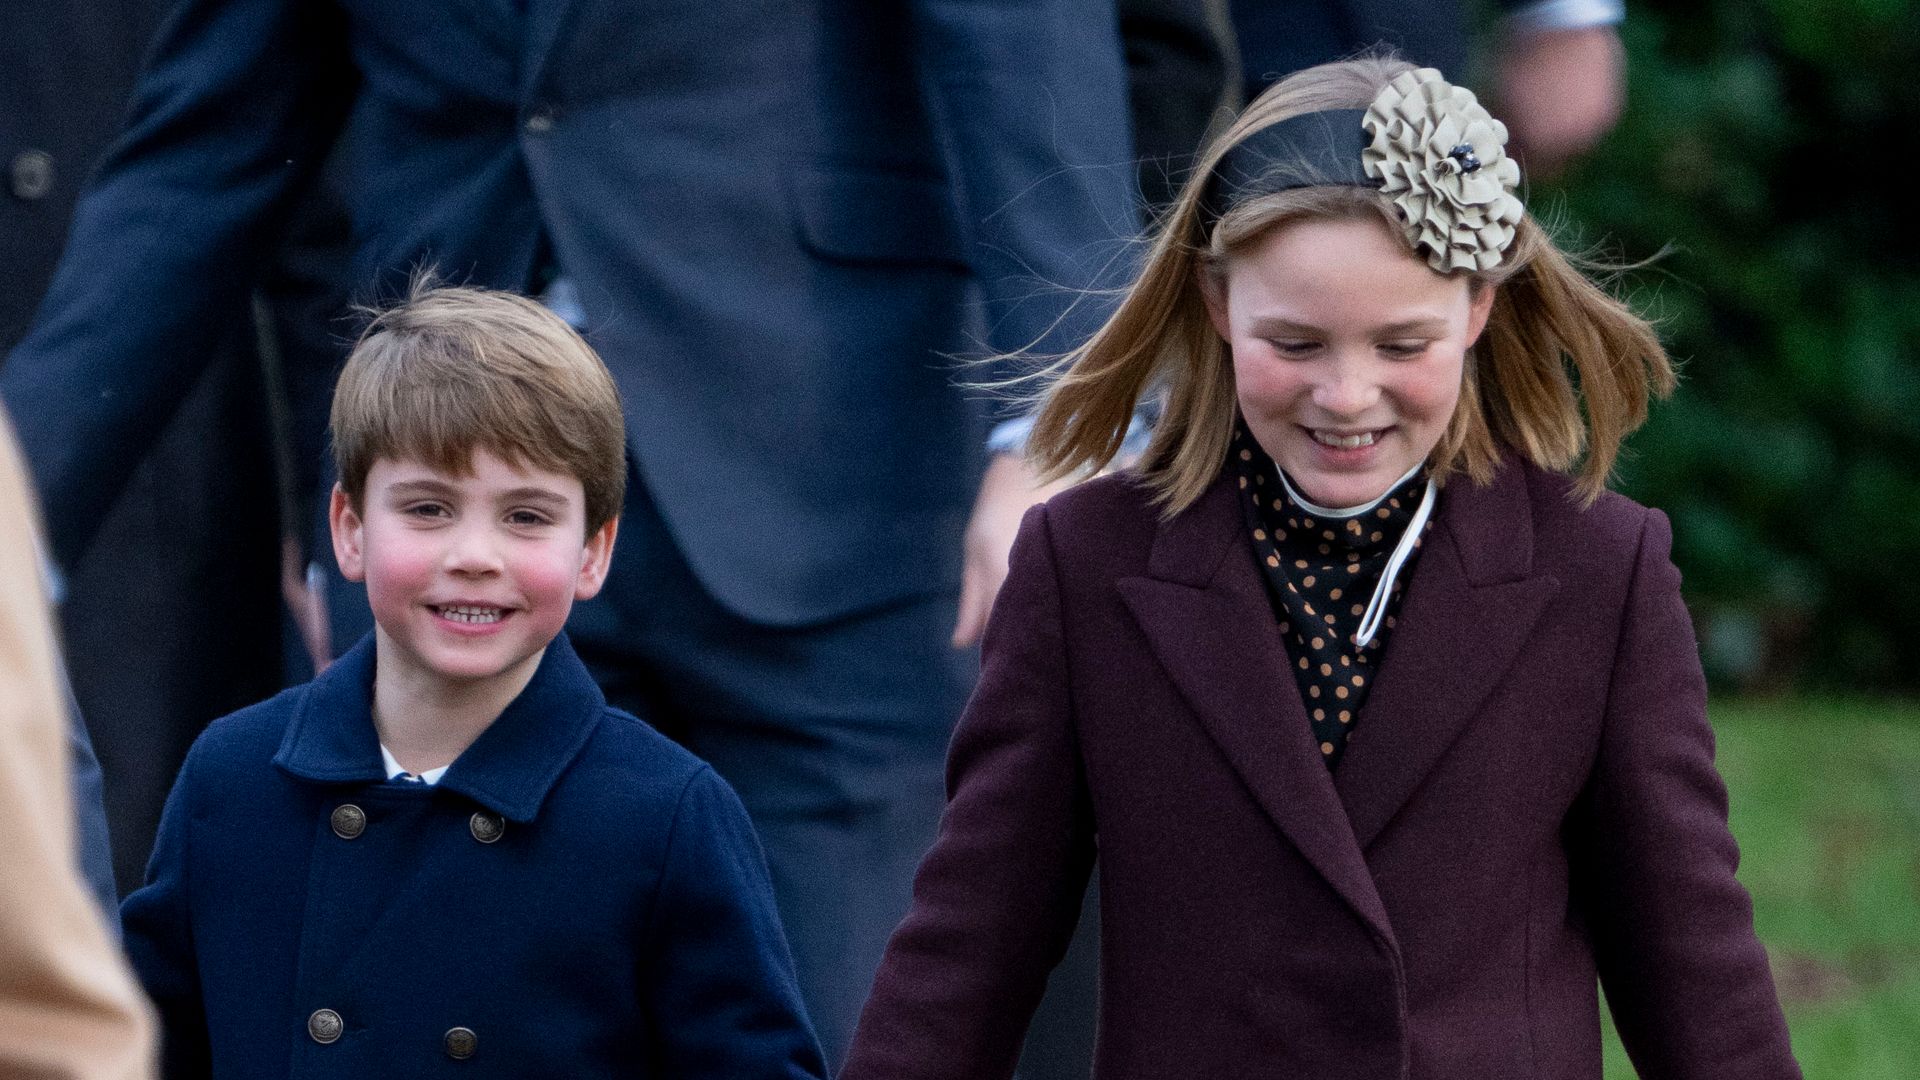 Prince Louis of Wales and Mia Tindall attend the Christmas Day service at St Mary Magdalene Chur